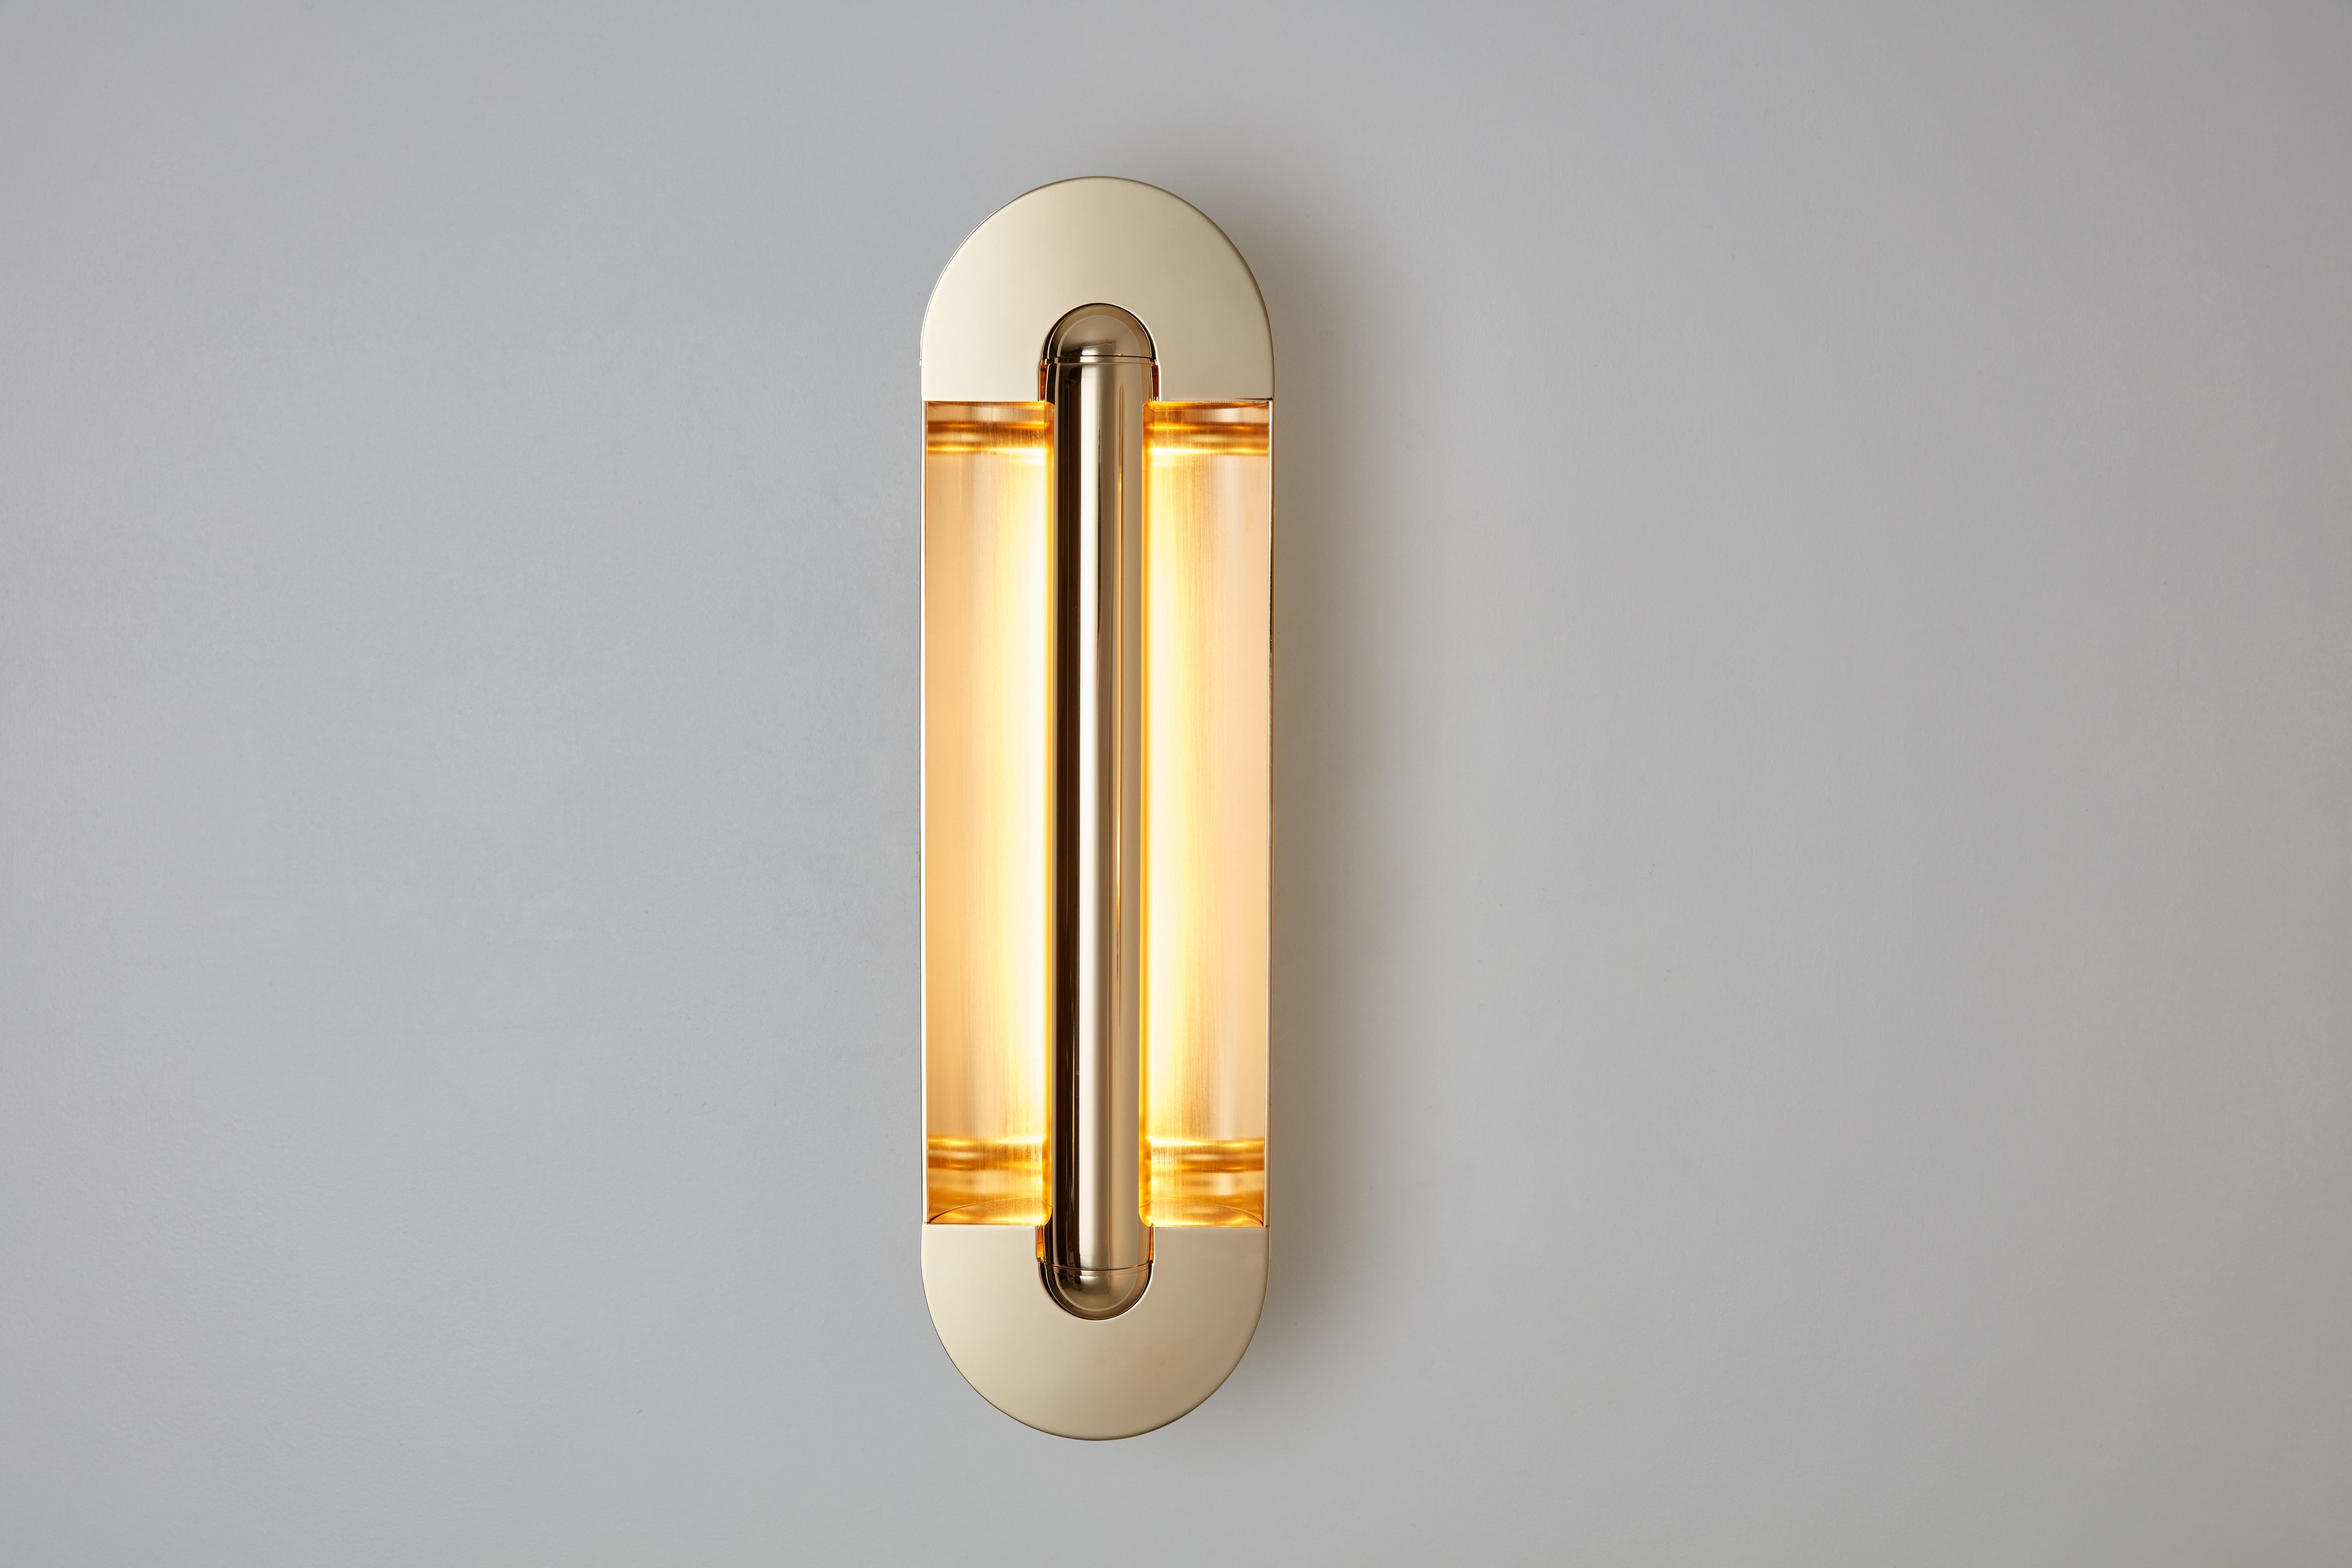 Cosmos Mini wall lamp by Mydriaz
Dimensions: D 10 x W 9.5 x H 33 cm
Materials: Pale gold polished and brushed brass.
5kg

Our products are handmade in our workshop. Dimensions and finishes may vary slightly from one model to another dimensions